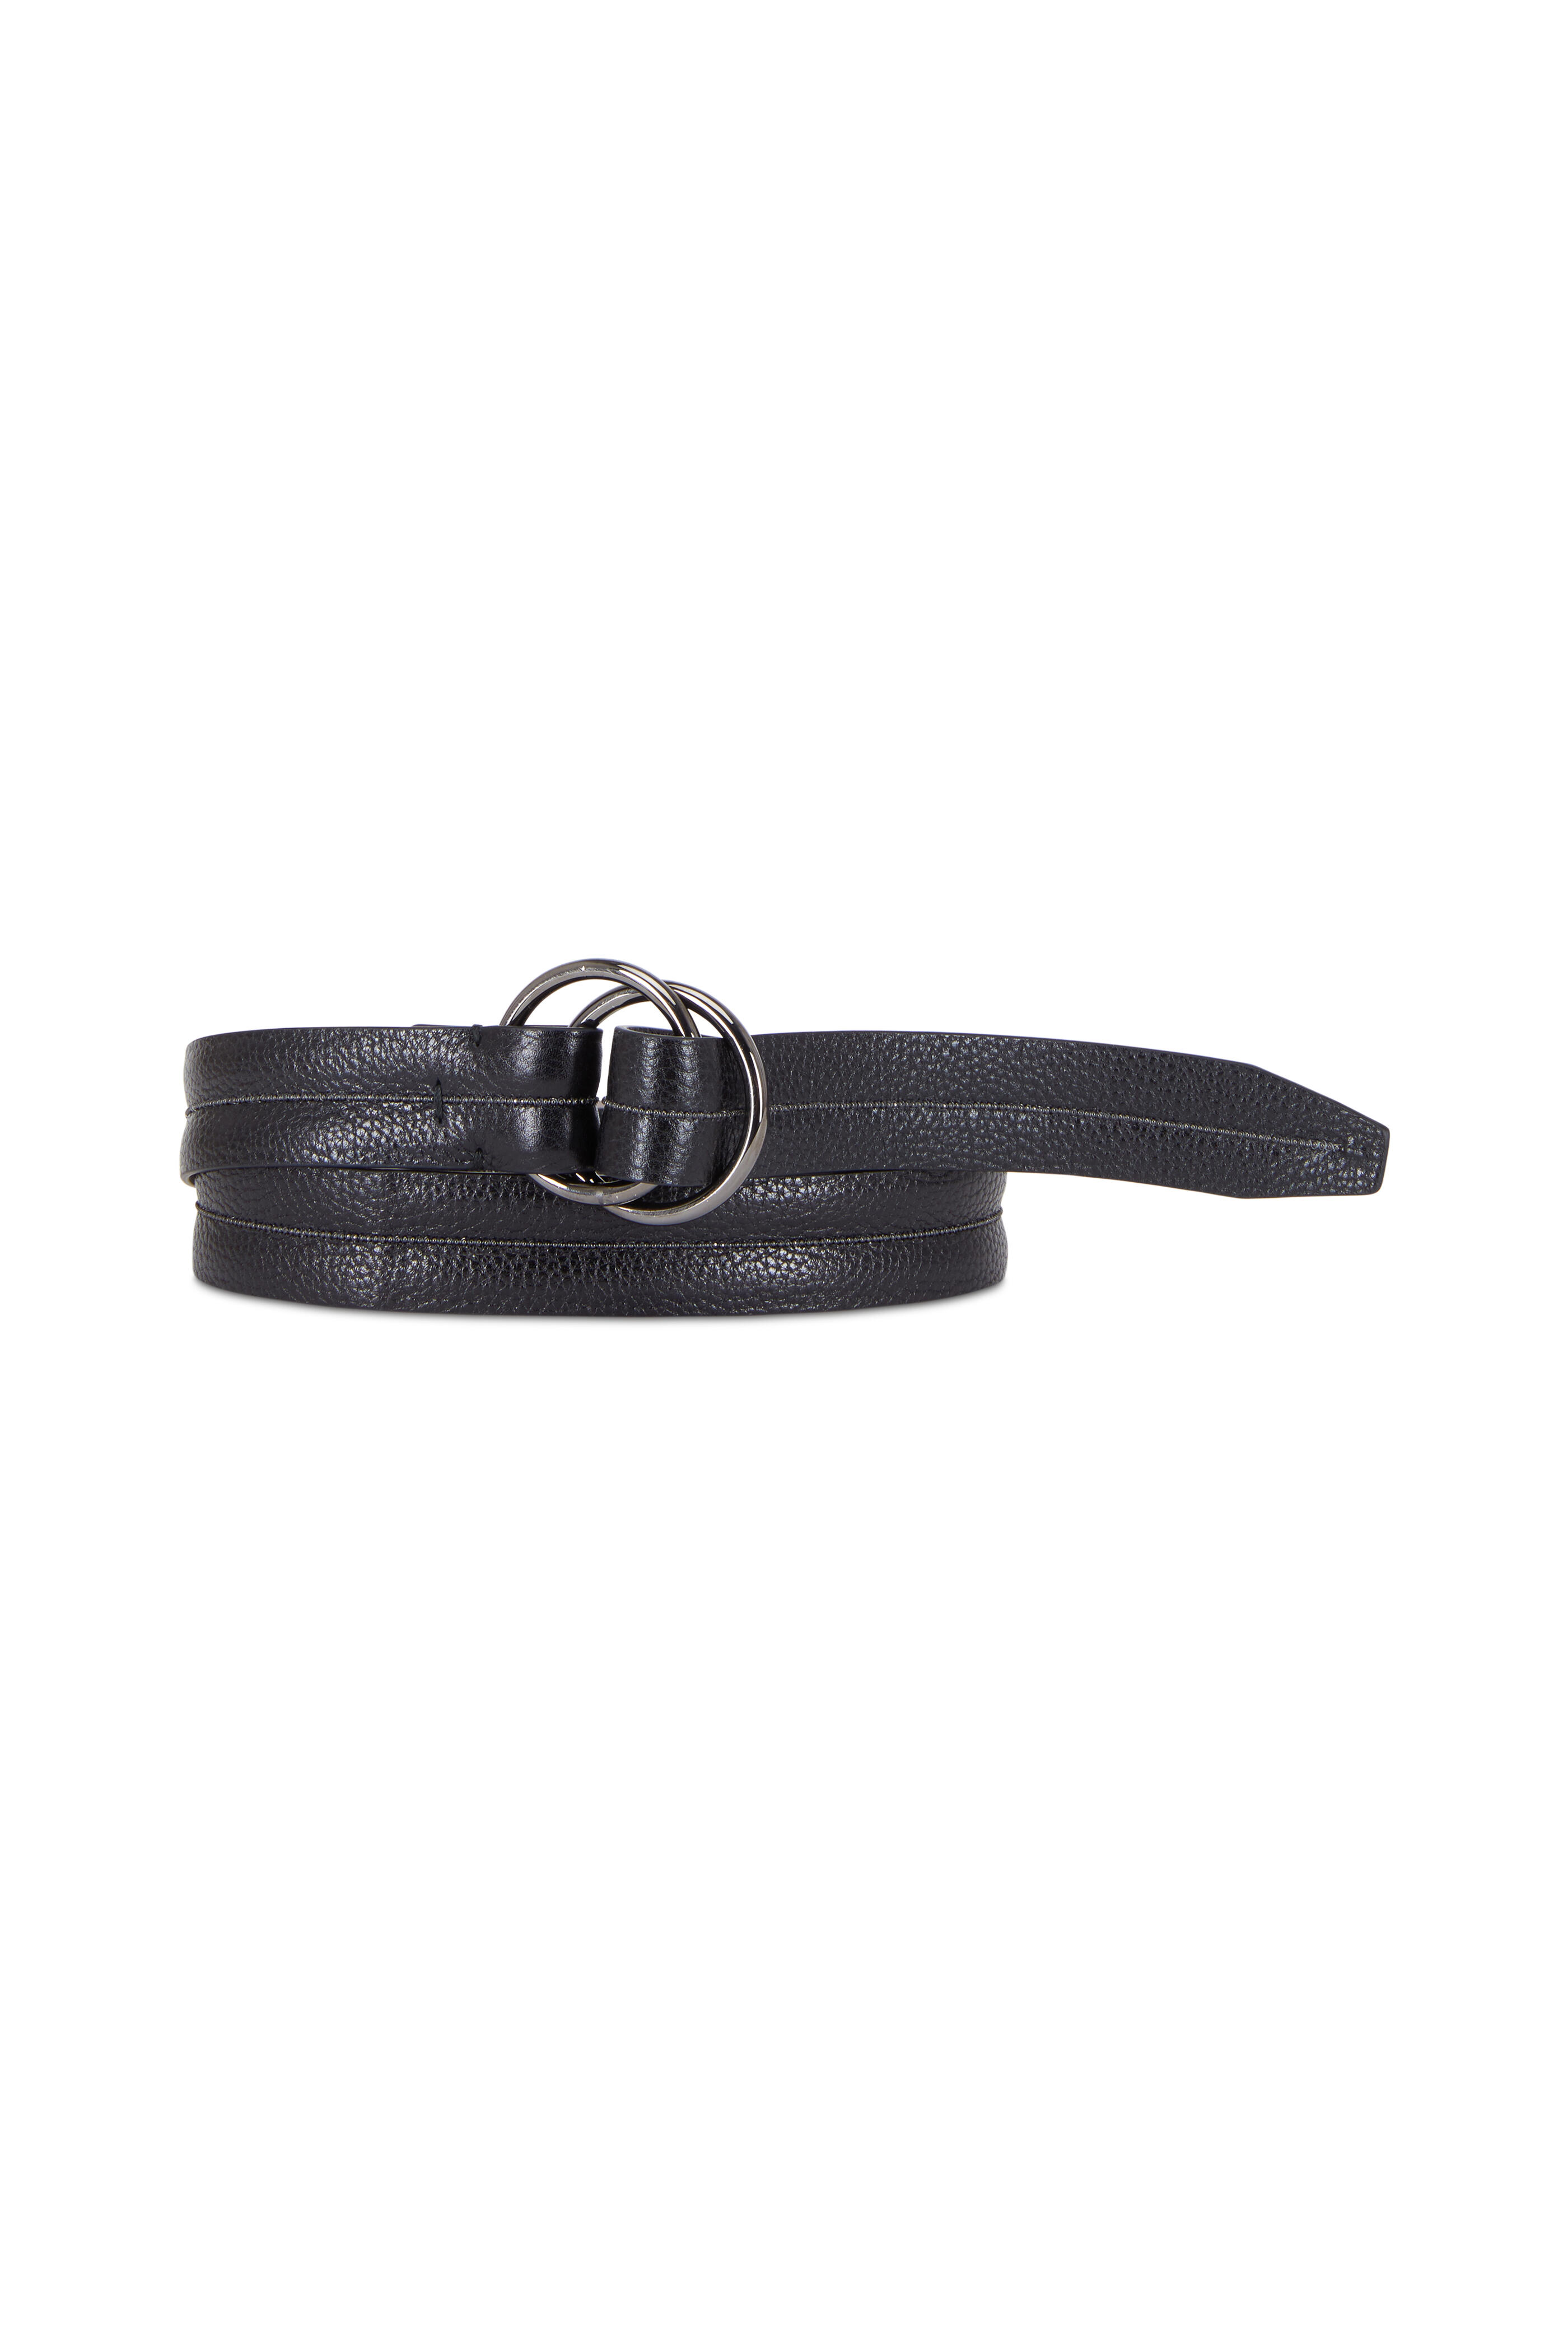 Italian-leather belt with D-ring details